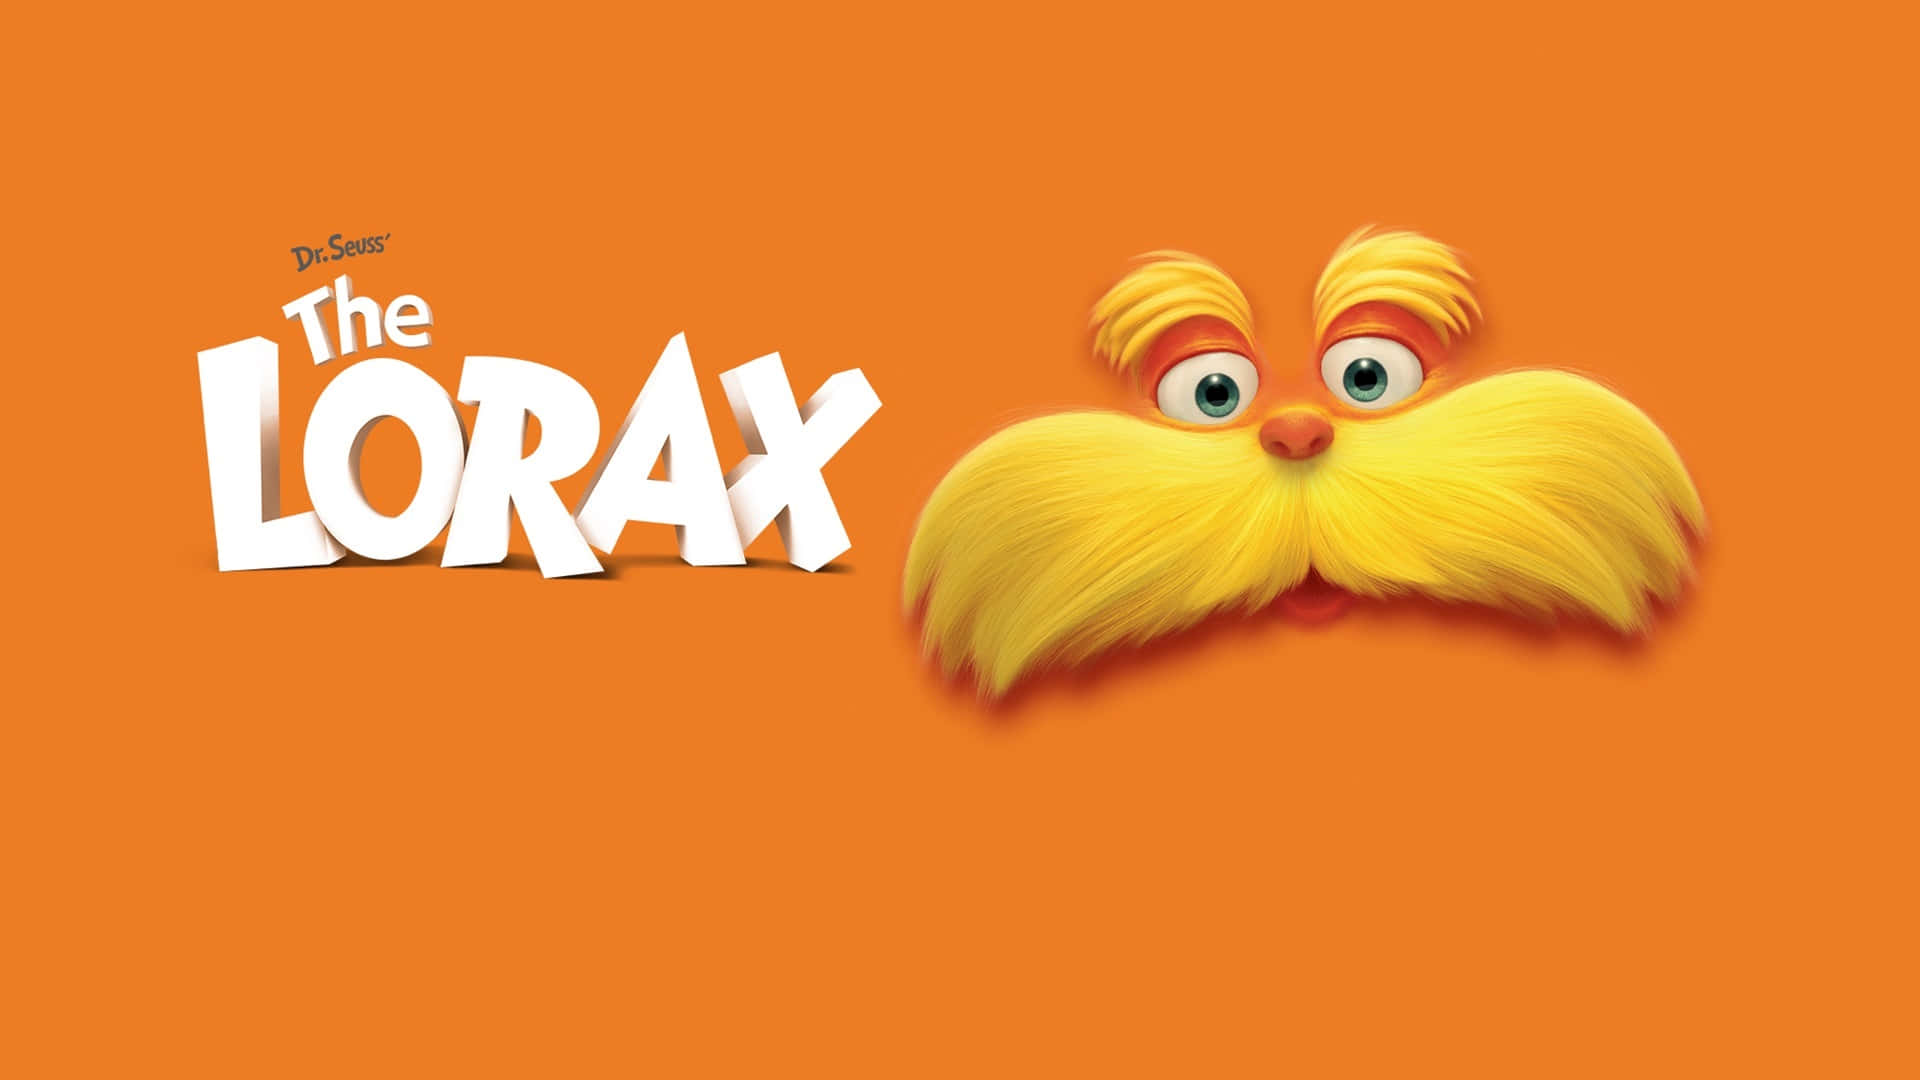 The Lorax Movie Titleand Character Background